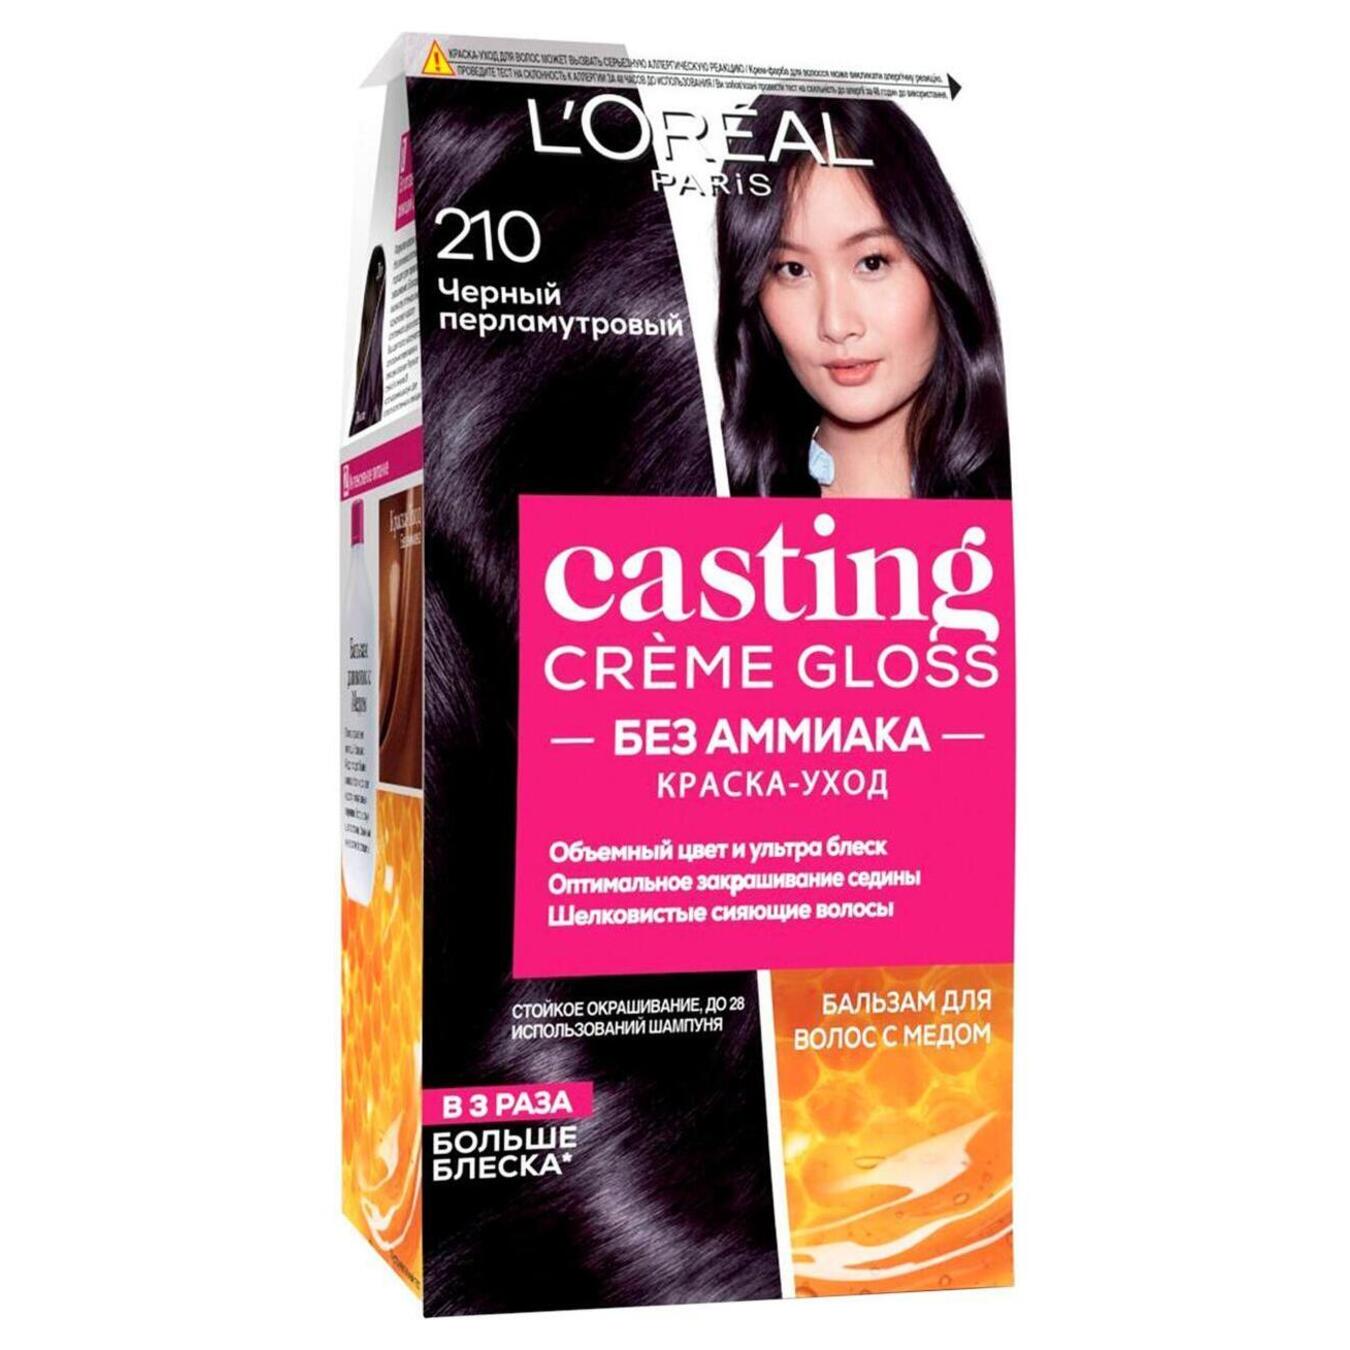 Creme dye for hair without ammonia L'Oreal Paris Casting Creme Gloss 210 Black pearl 120ml